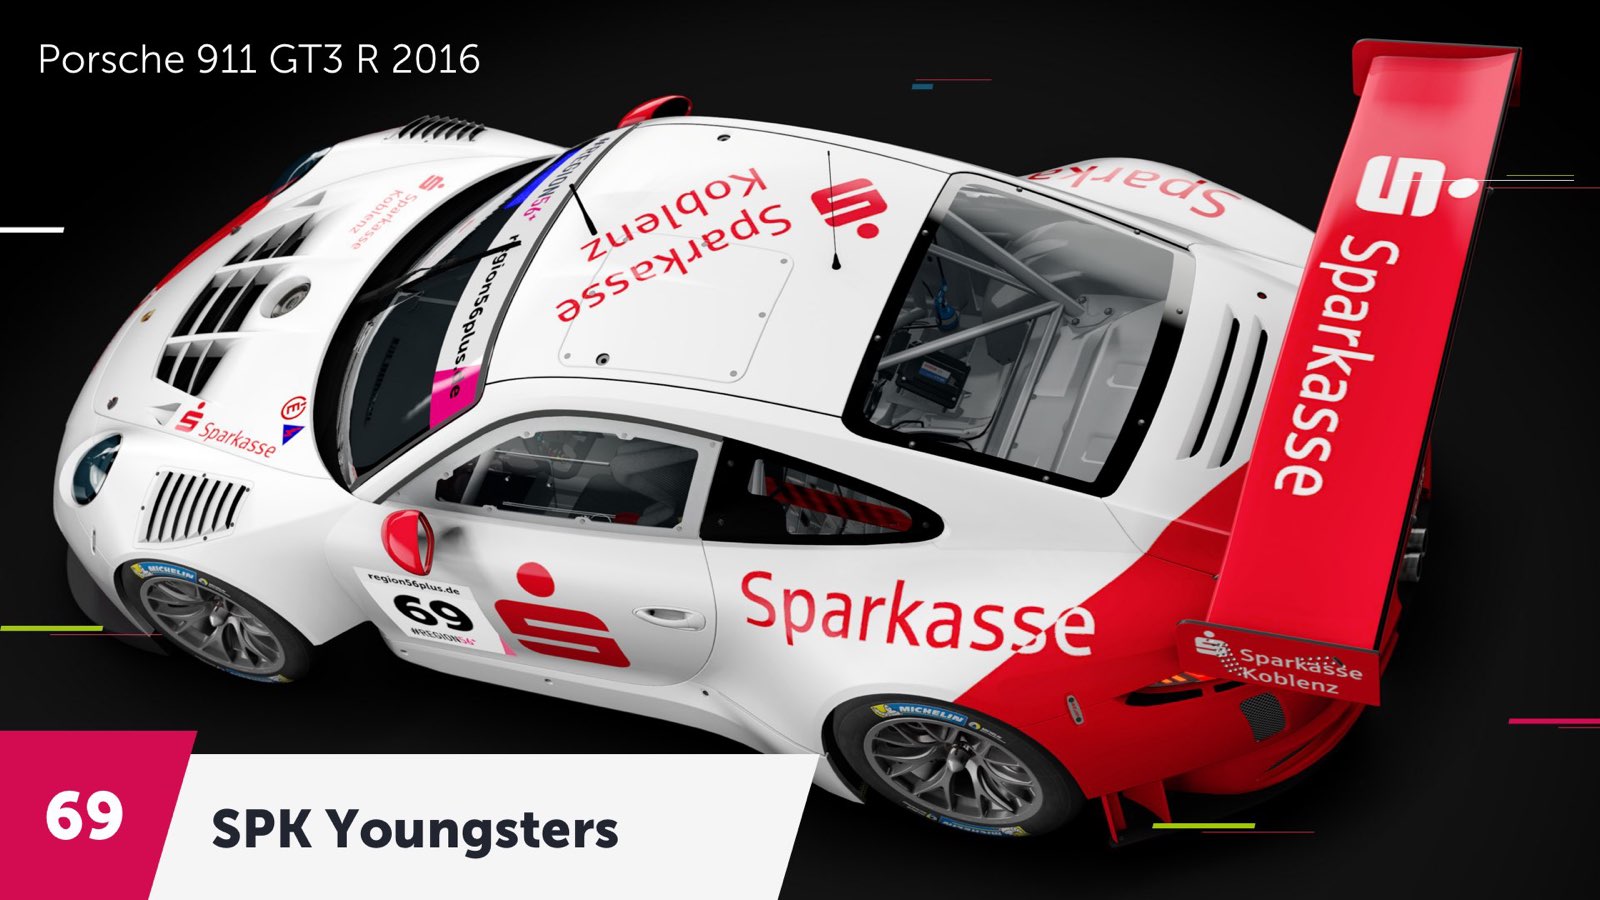 R56+ eRACING-CUP - Team SPK Youngsters